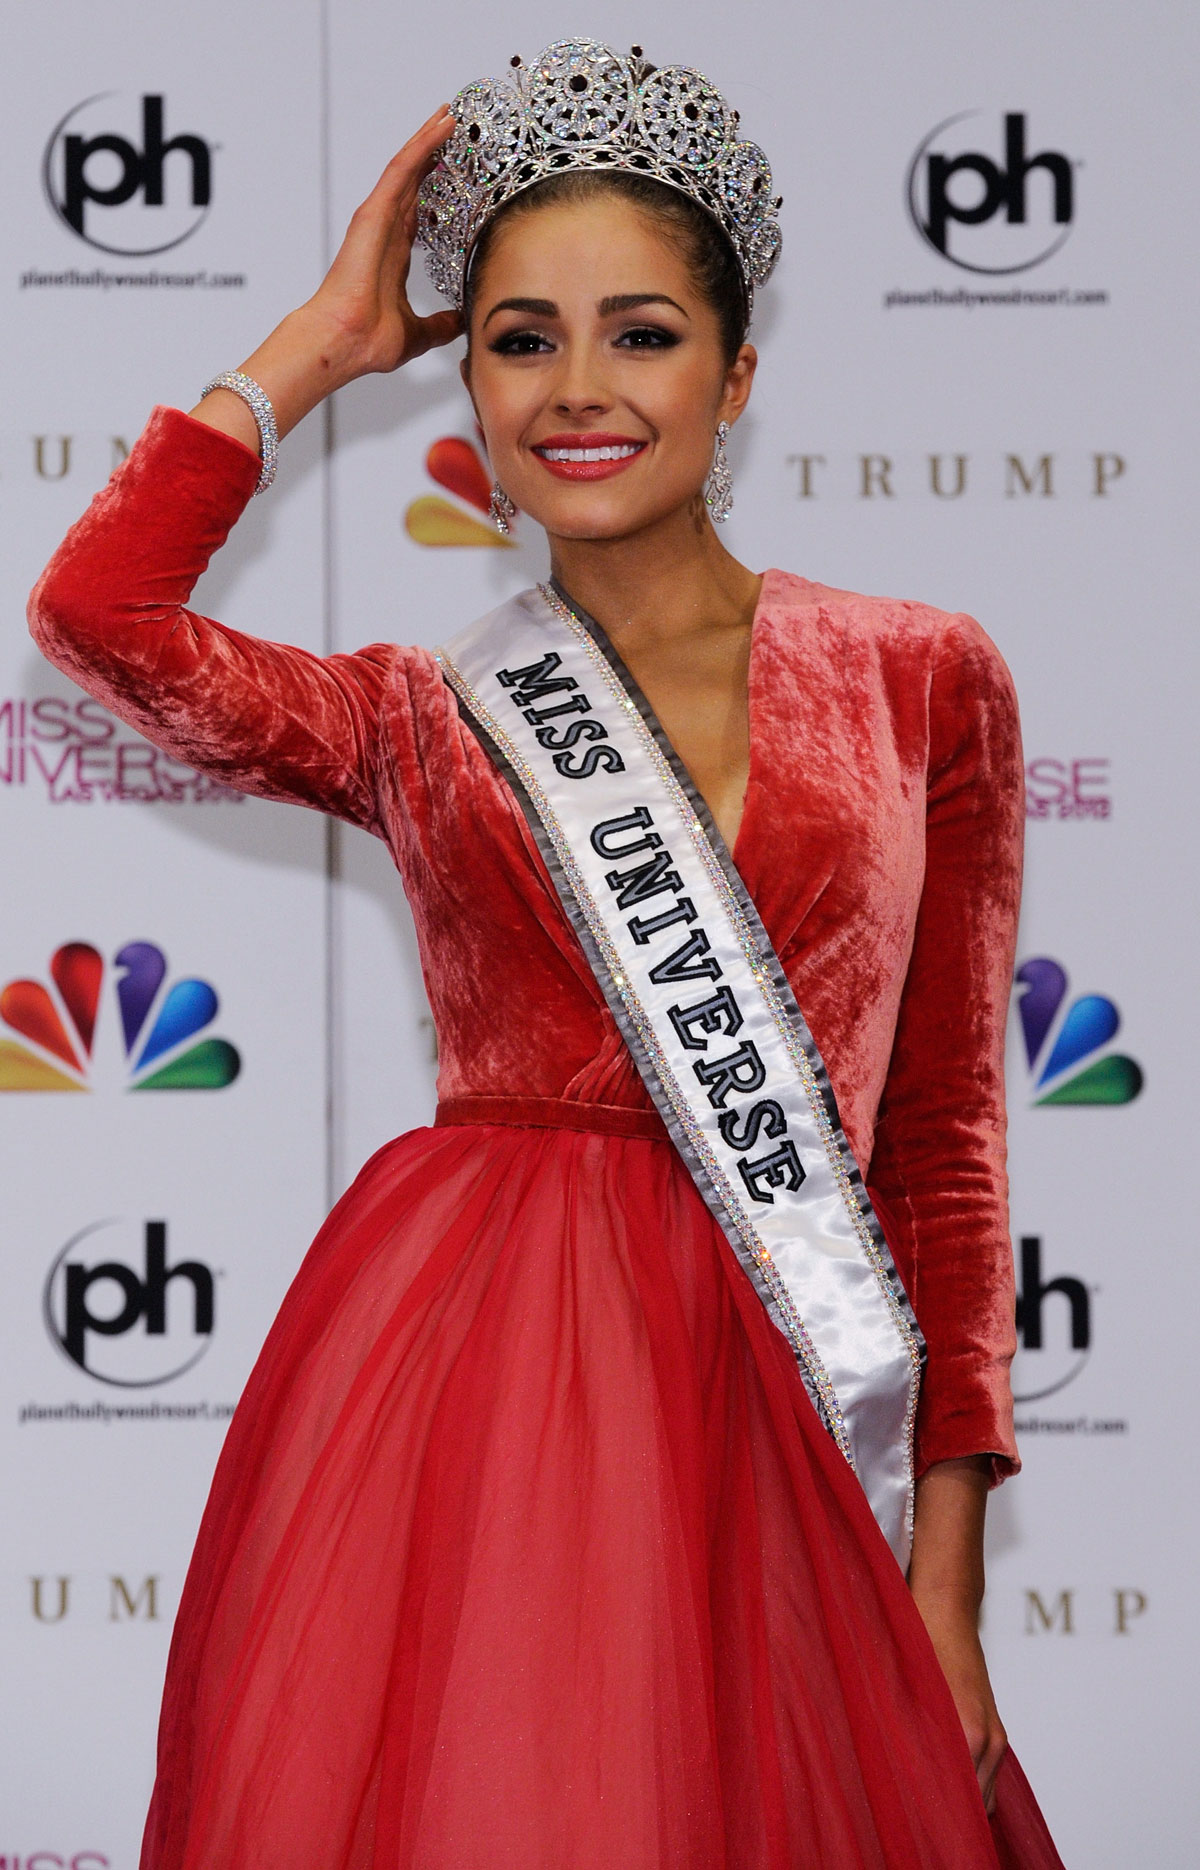 OLIVIA-CULPO-as-Miss-Universe-at-the-2012-Miss-Universe-Pageant-in-Las-Vegas-22.jpg